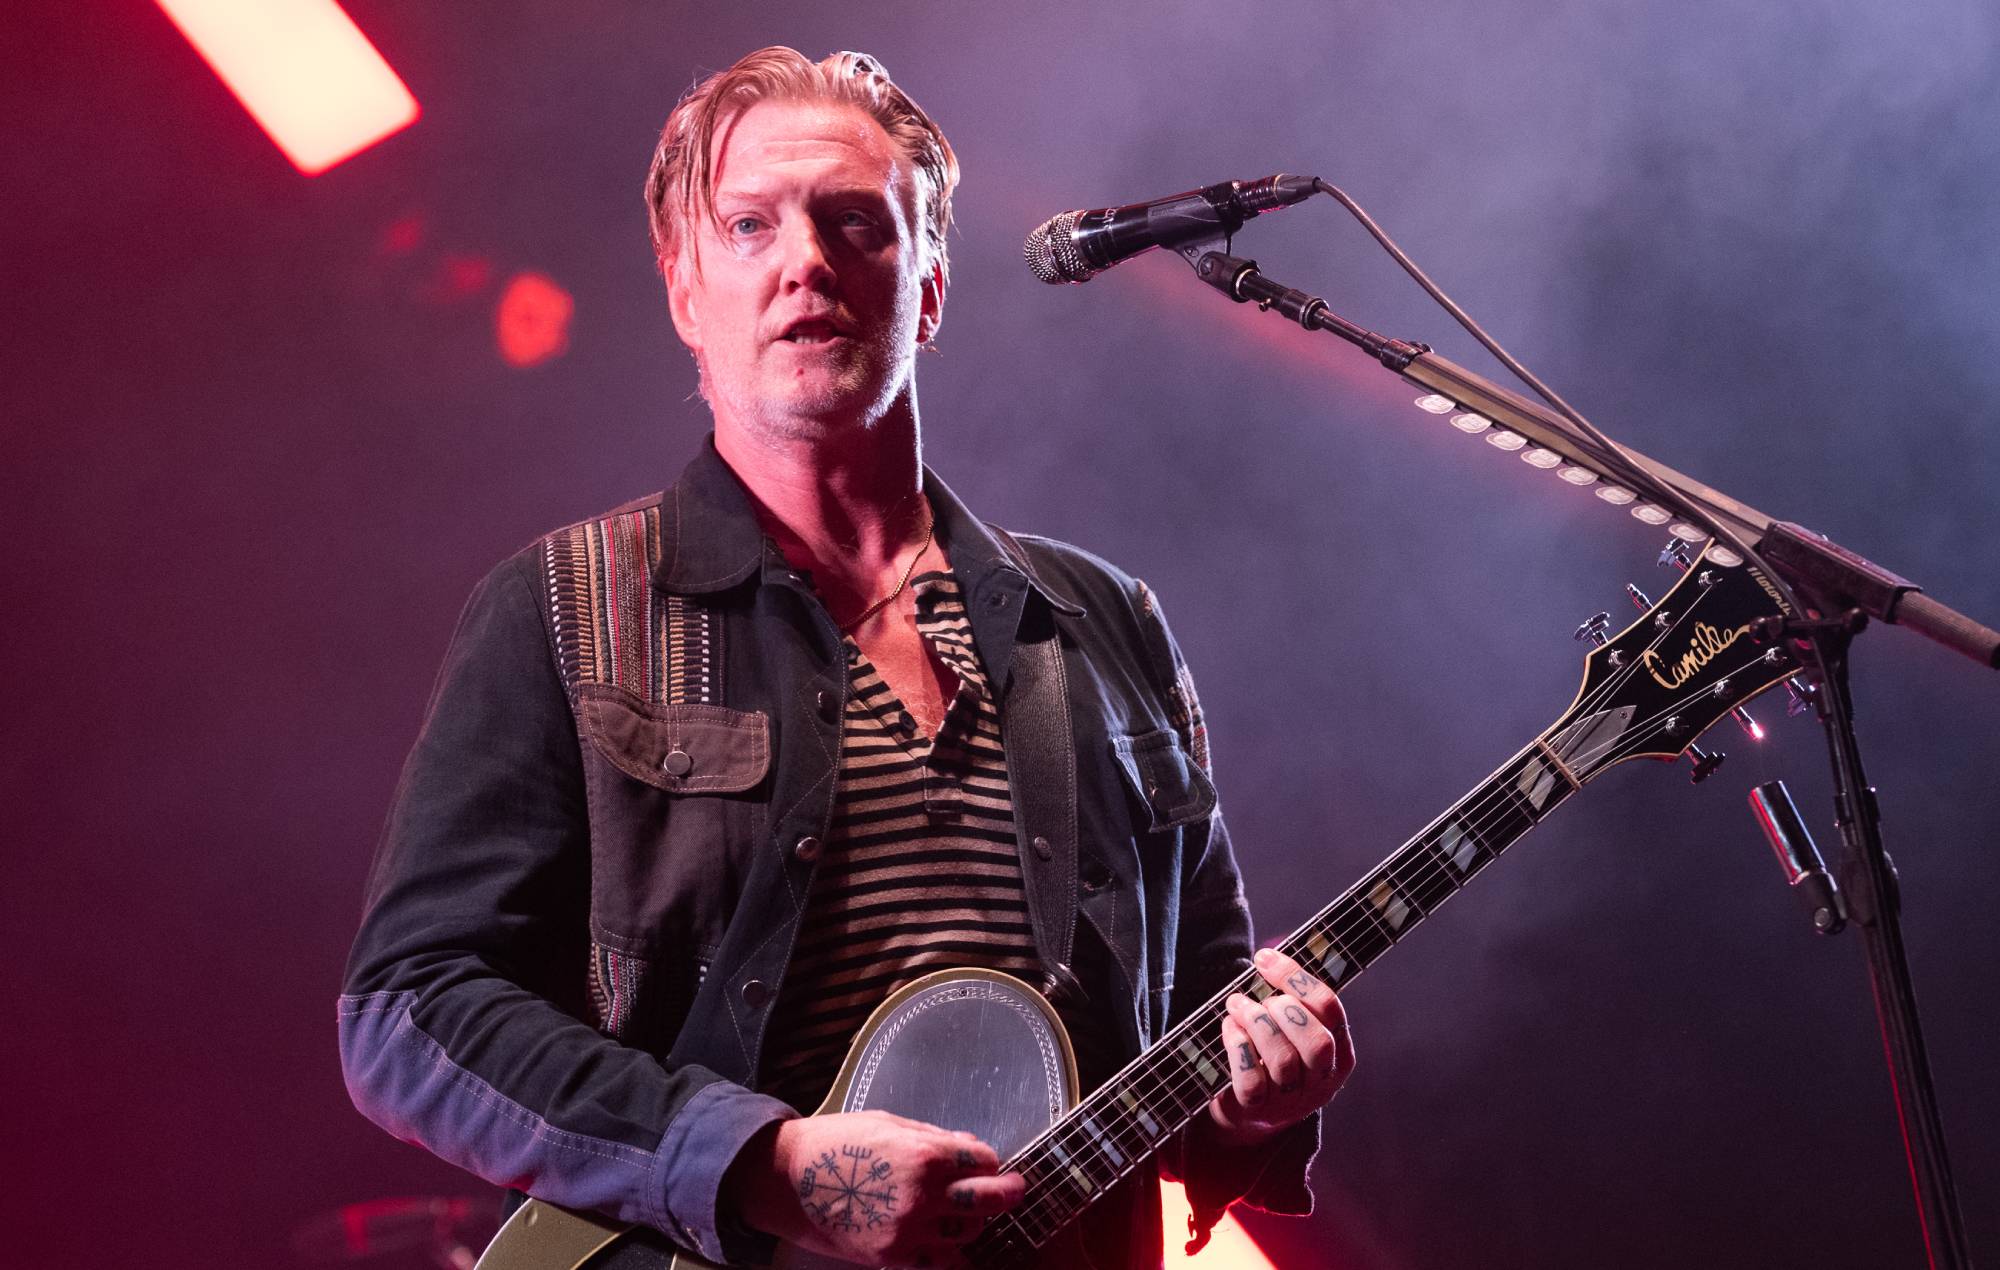 Queens Of The Stone Age to play gig in Paris Catacombs